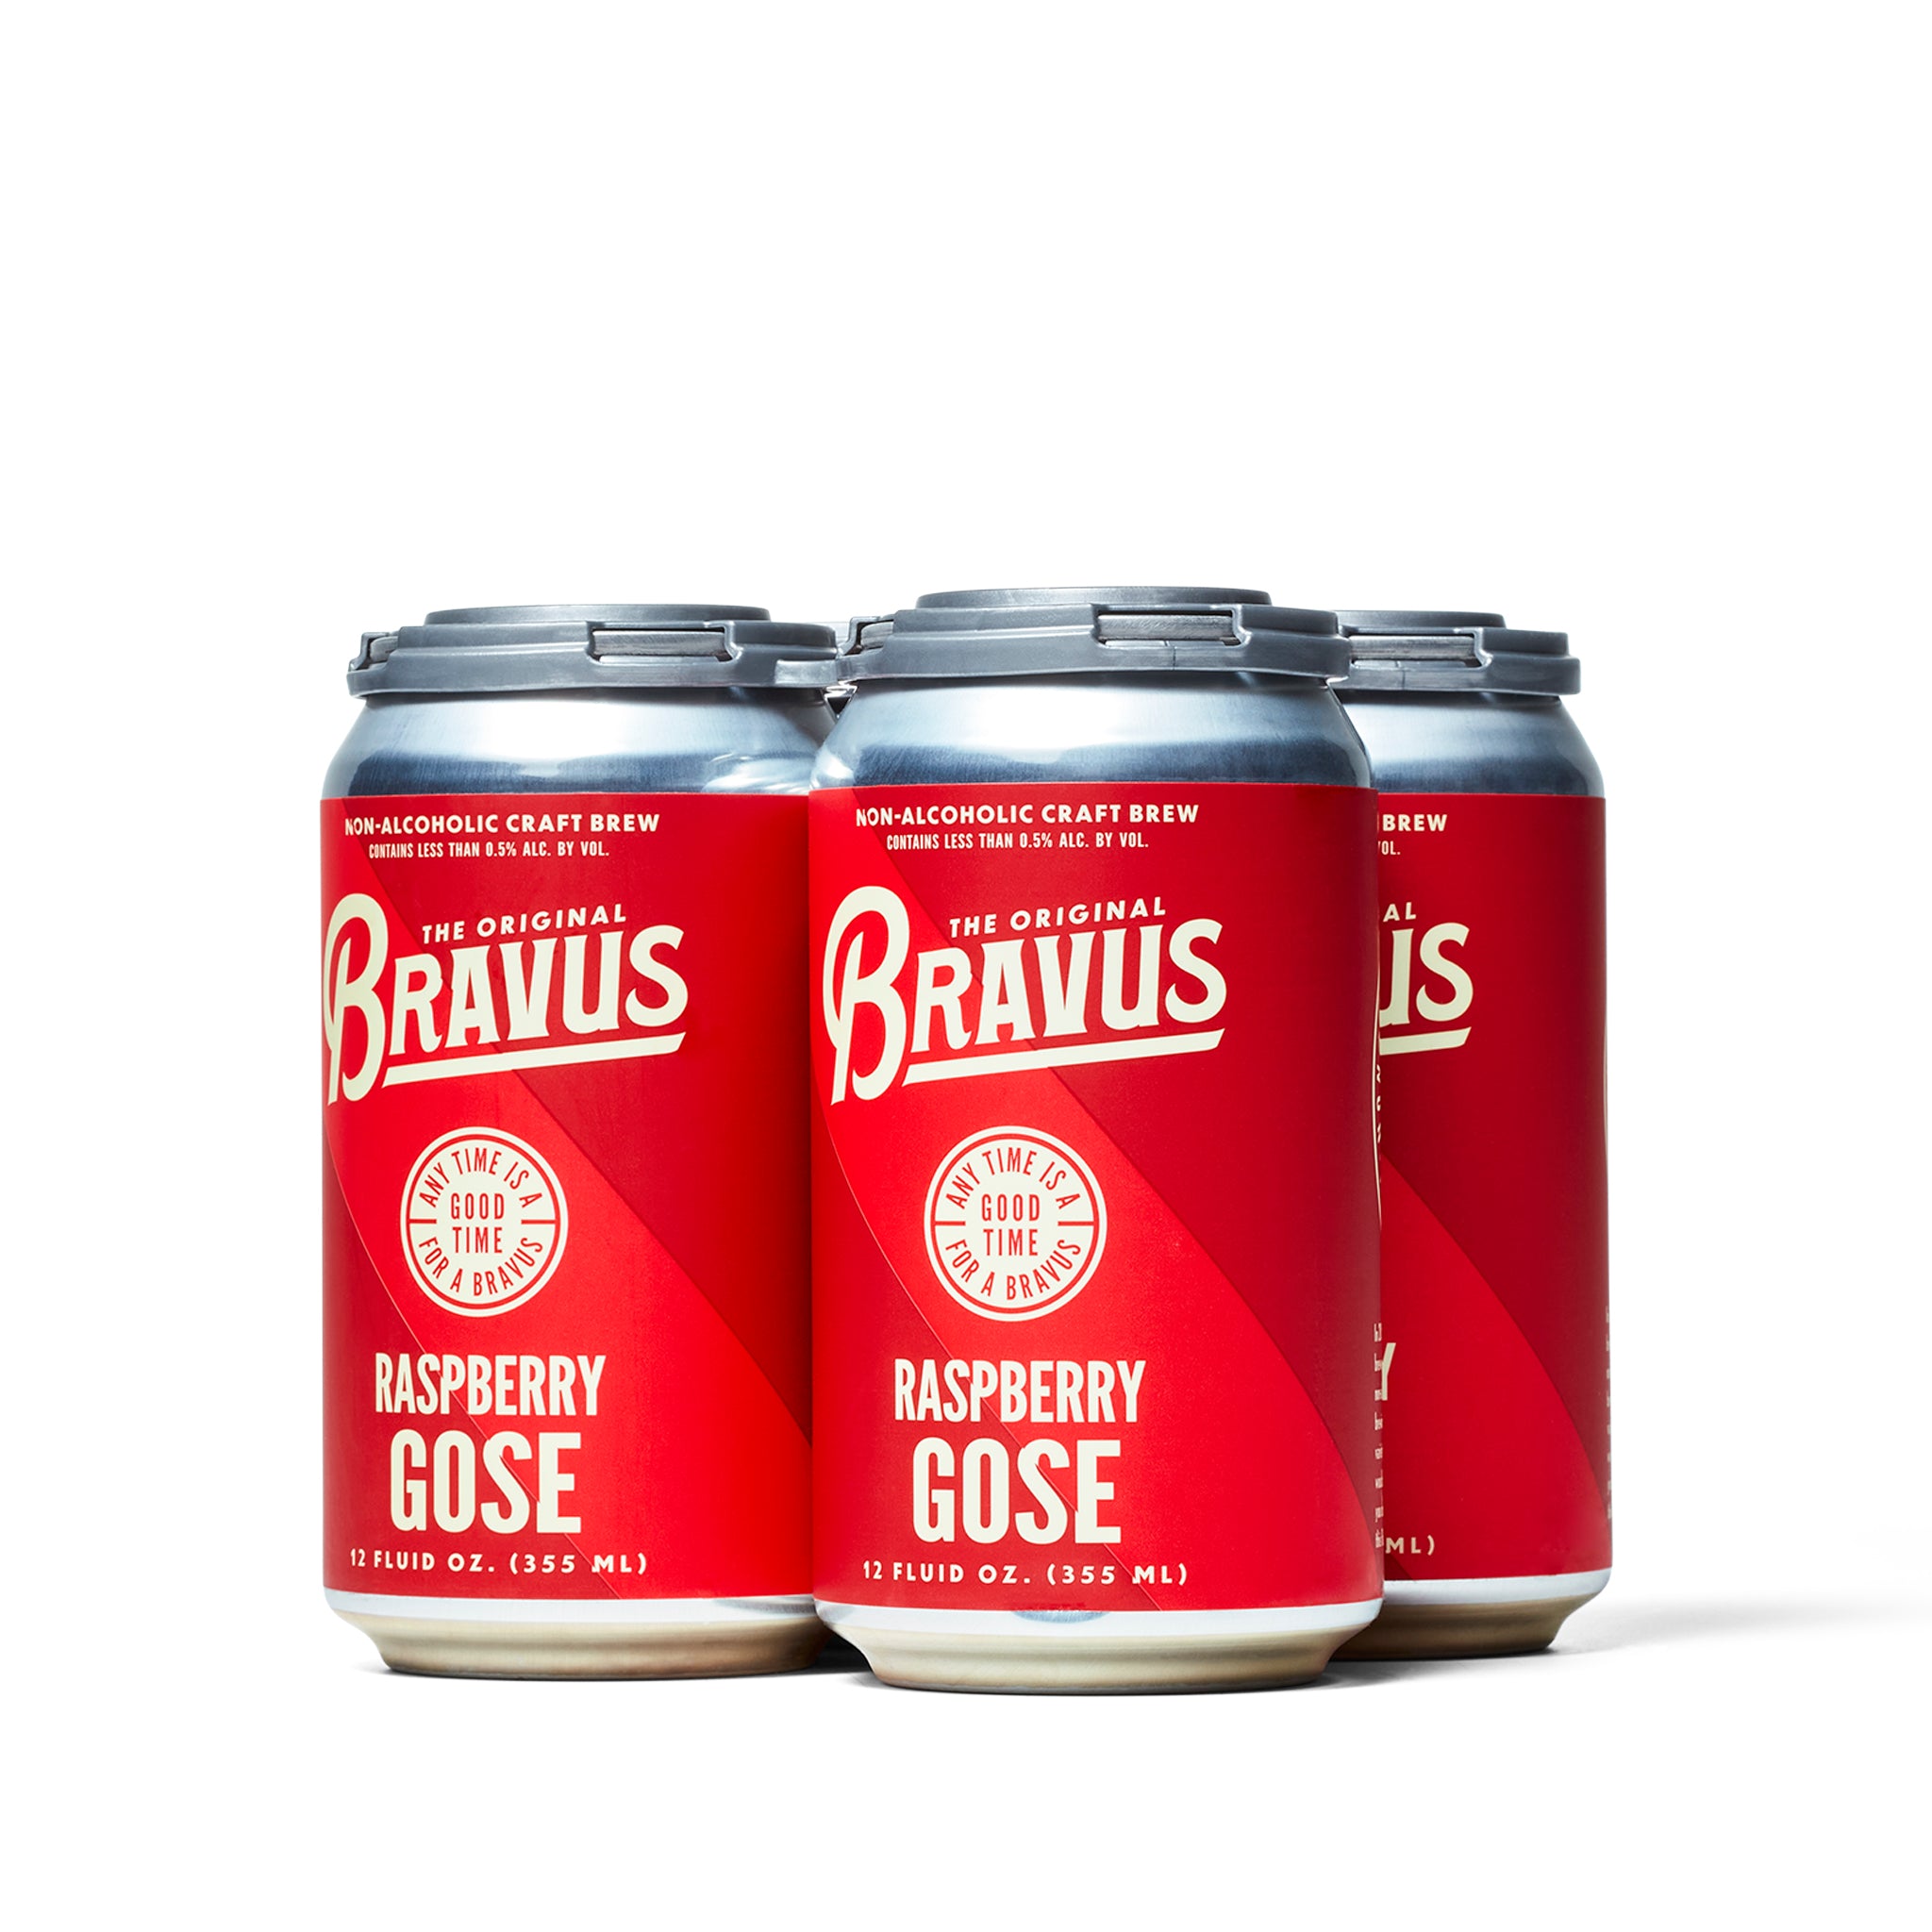 Curious about gose-style beer? This California brewery has it